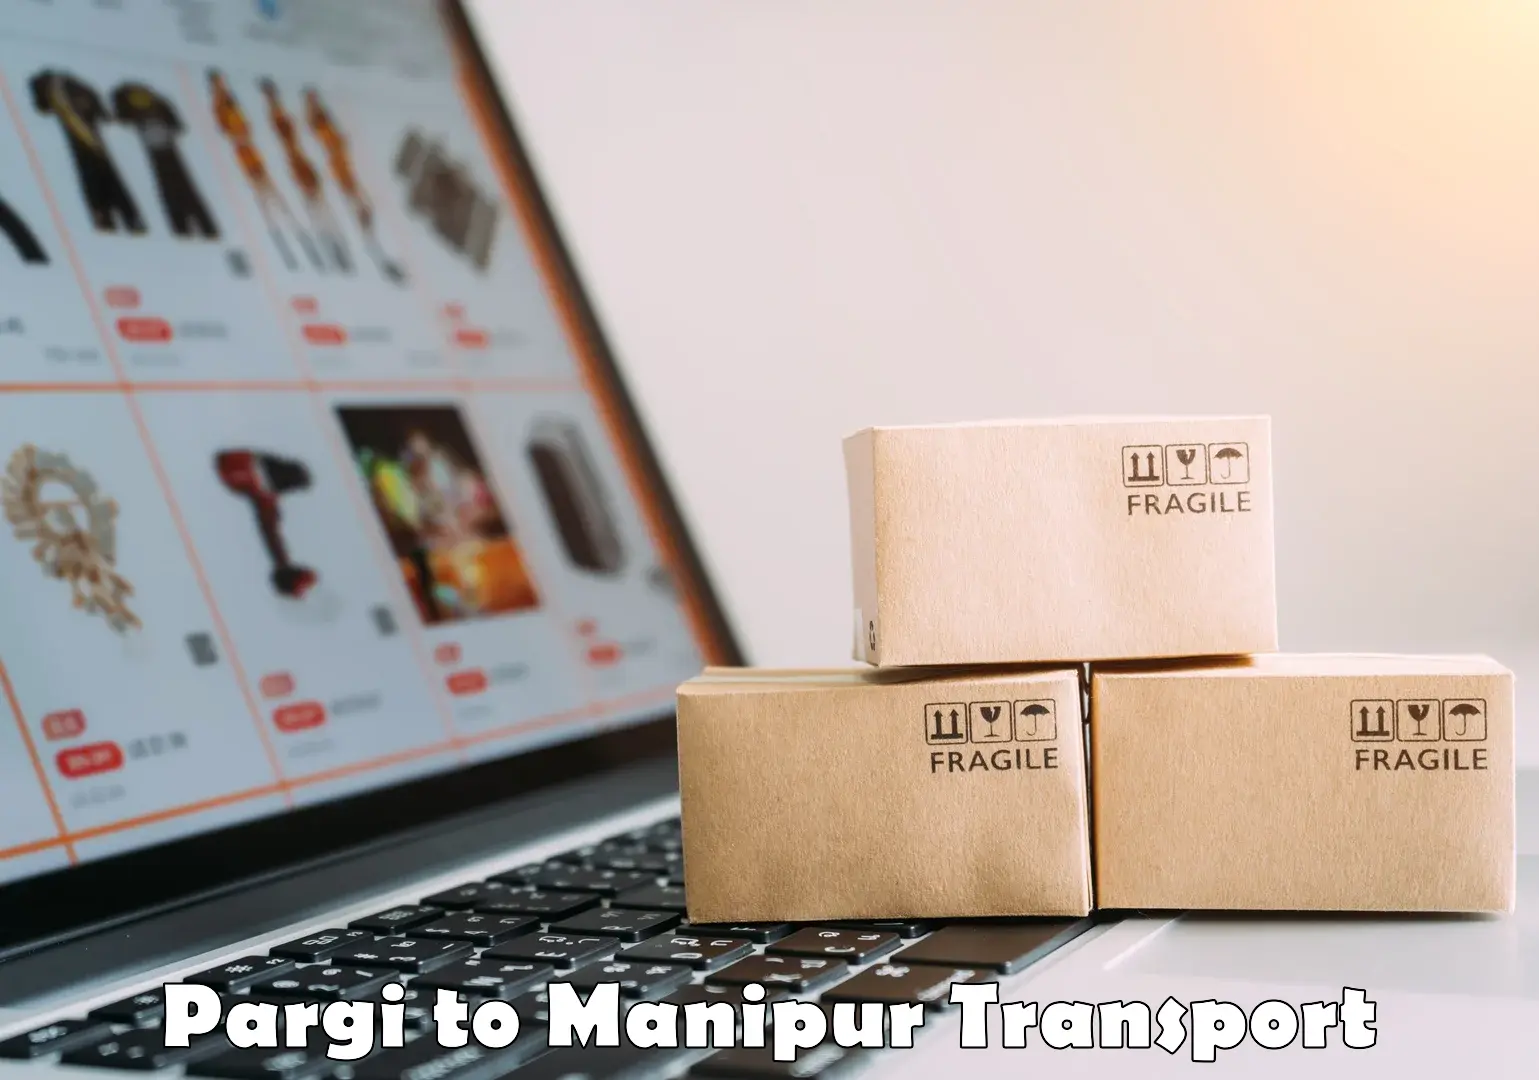 Nearby transport service Pargi to Manipur